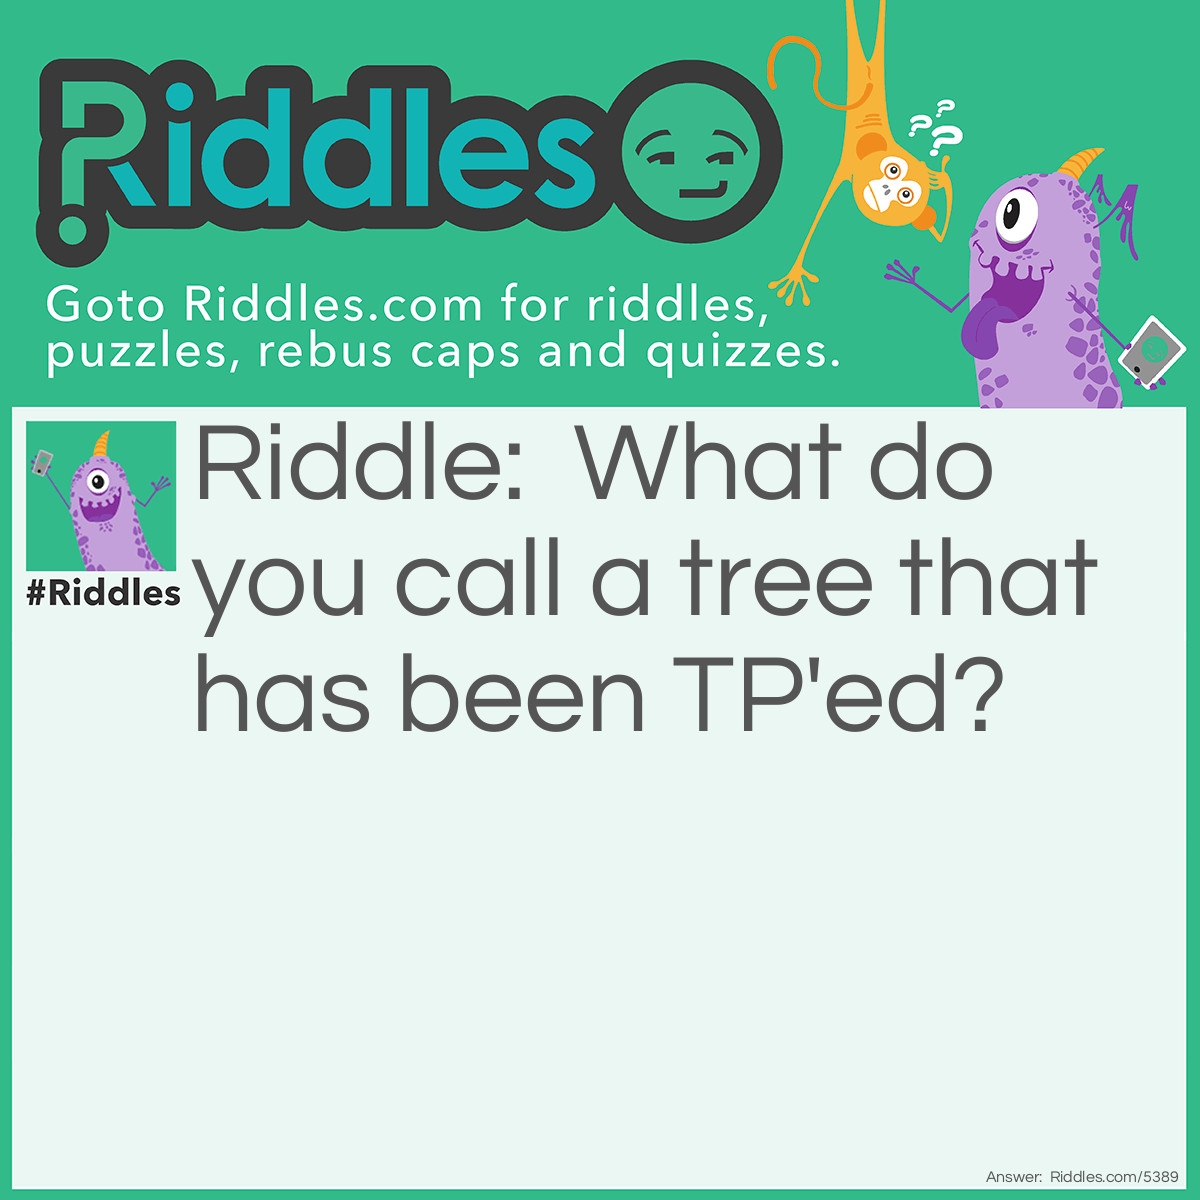 Riddle: What do you call a tree that has been TP'ed? Answer: A toiletry.